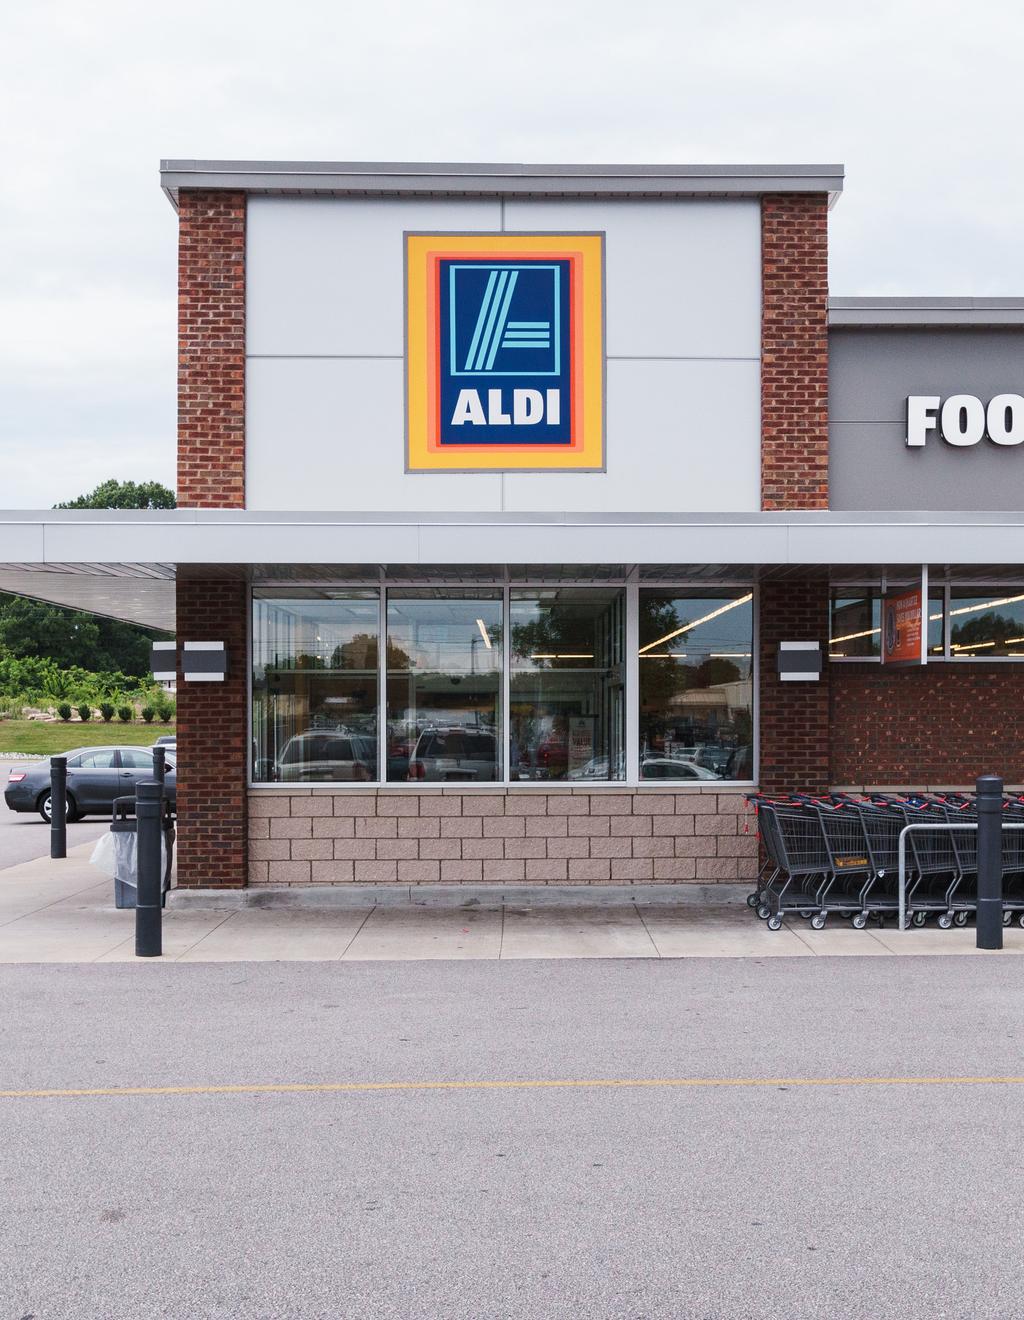 TEN A N T O V E R V IEW ALDI Aldi originated in 1946 when Karl and Theo Albrecht took over their mother s grocery store in Essen, Germany. Within 4 years, they had opened 13 stores in the Ruhr Valley.